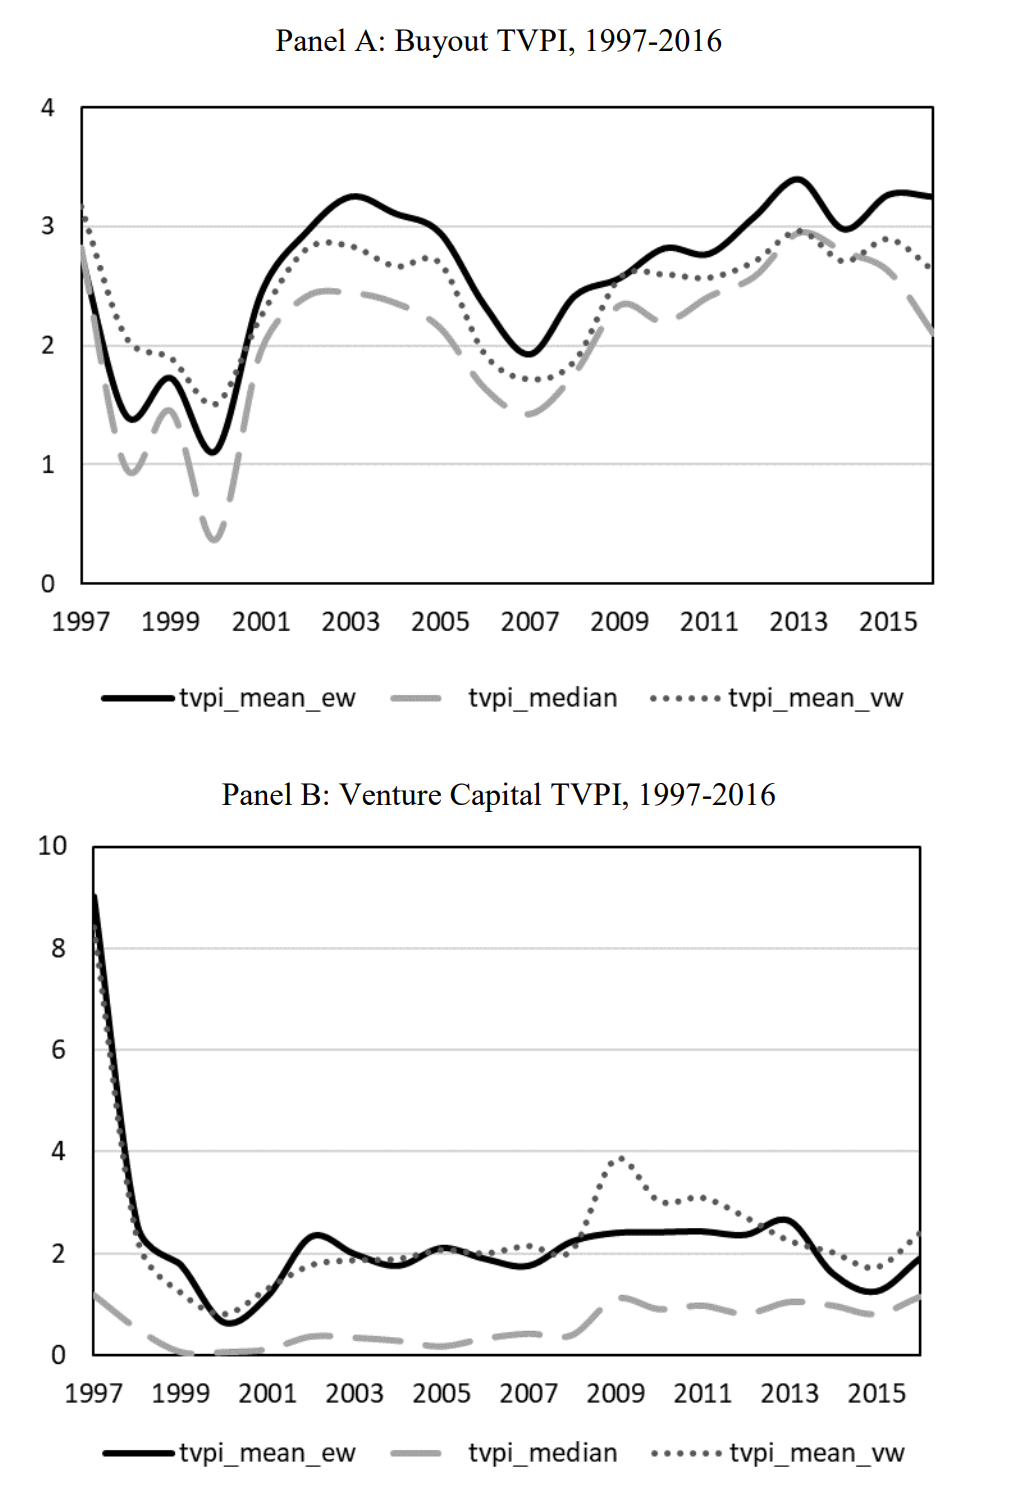 Screenshot of Figure A.3 of the paper by Brown et al. (2020). Equal- and value-weighted mean and median multiples /TVPIs for realized investments over time, split by type of investment.